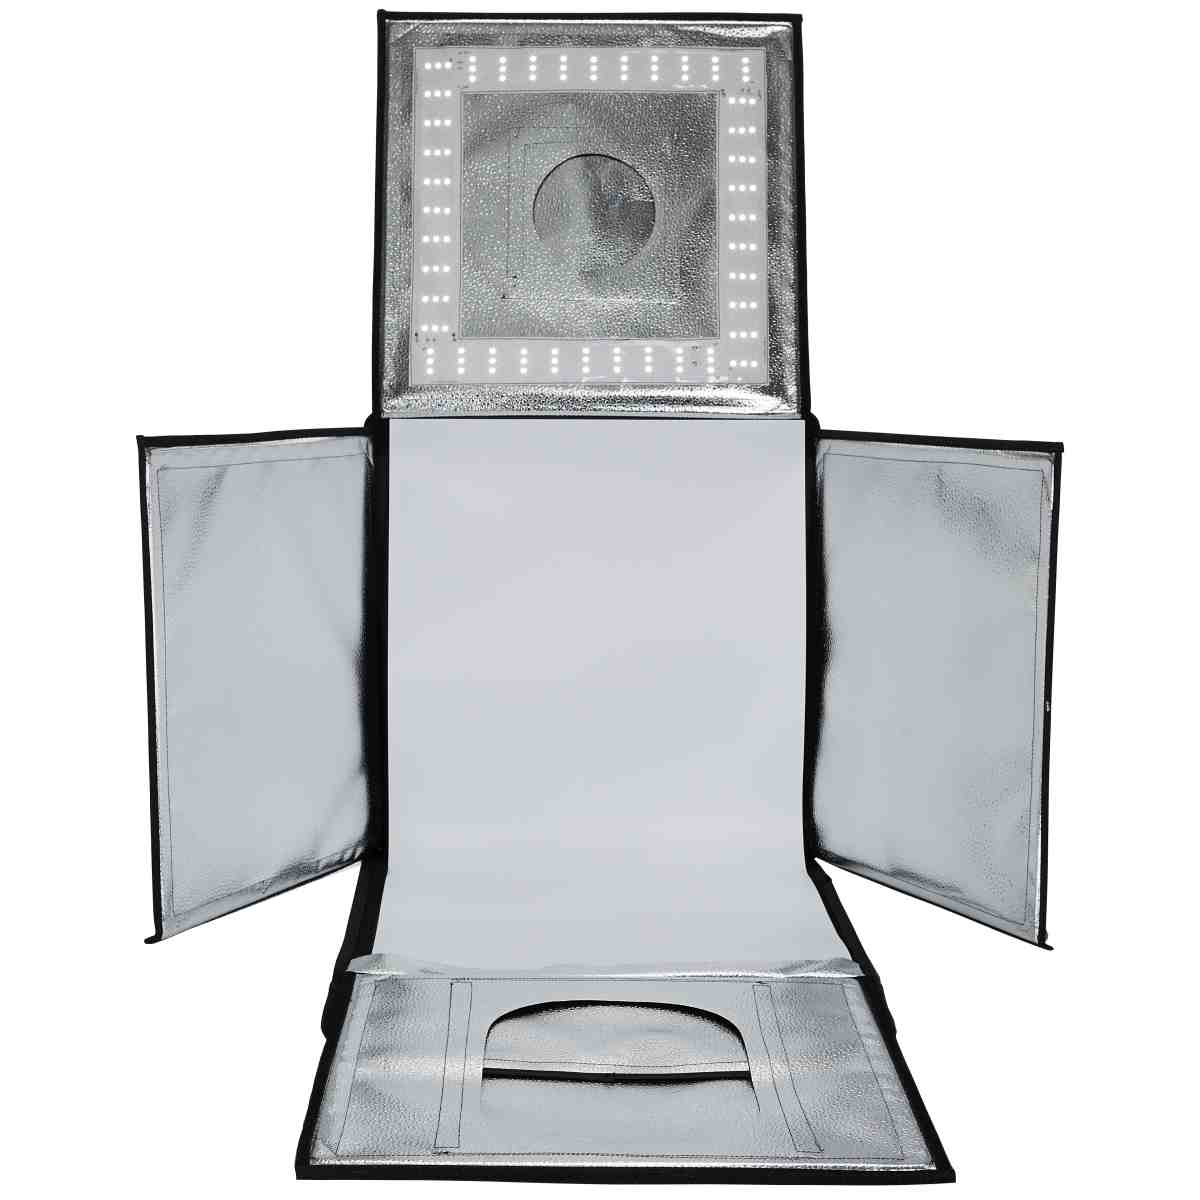 Collapsible LED photo cube 40x40cm